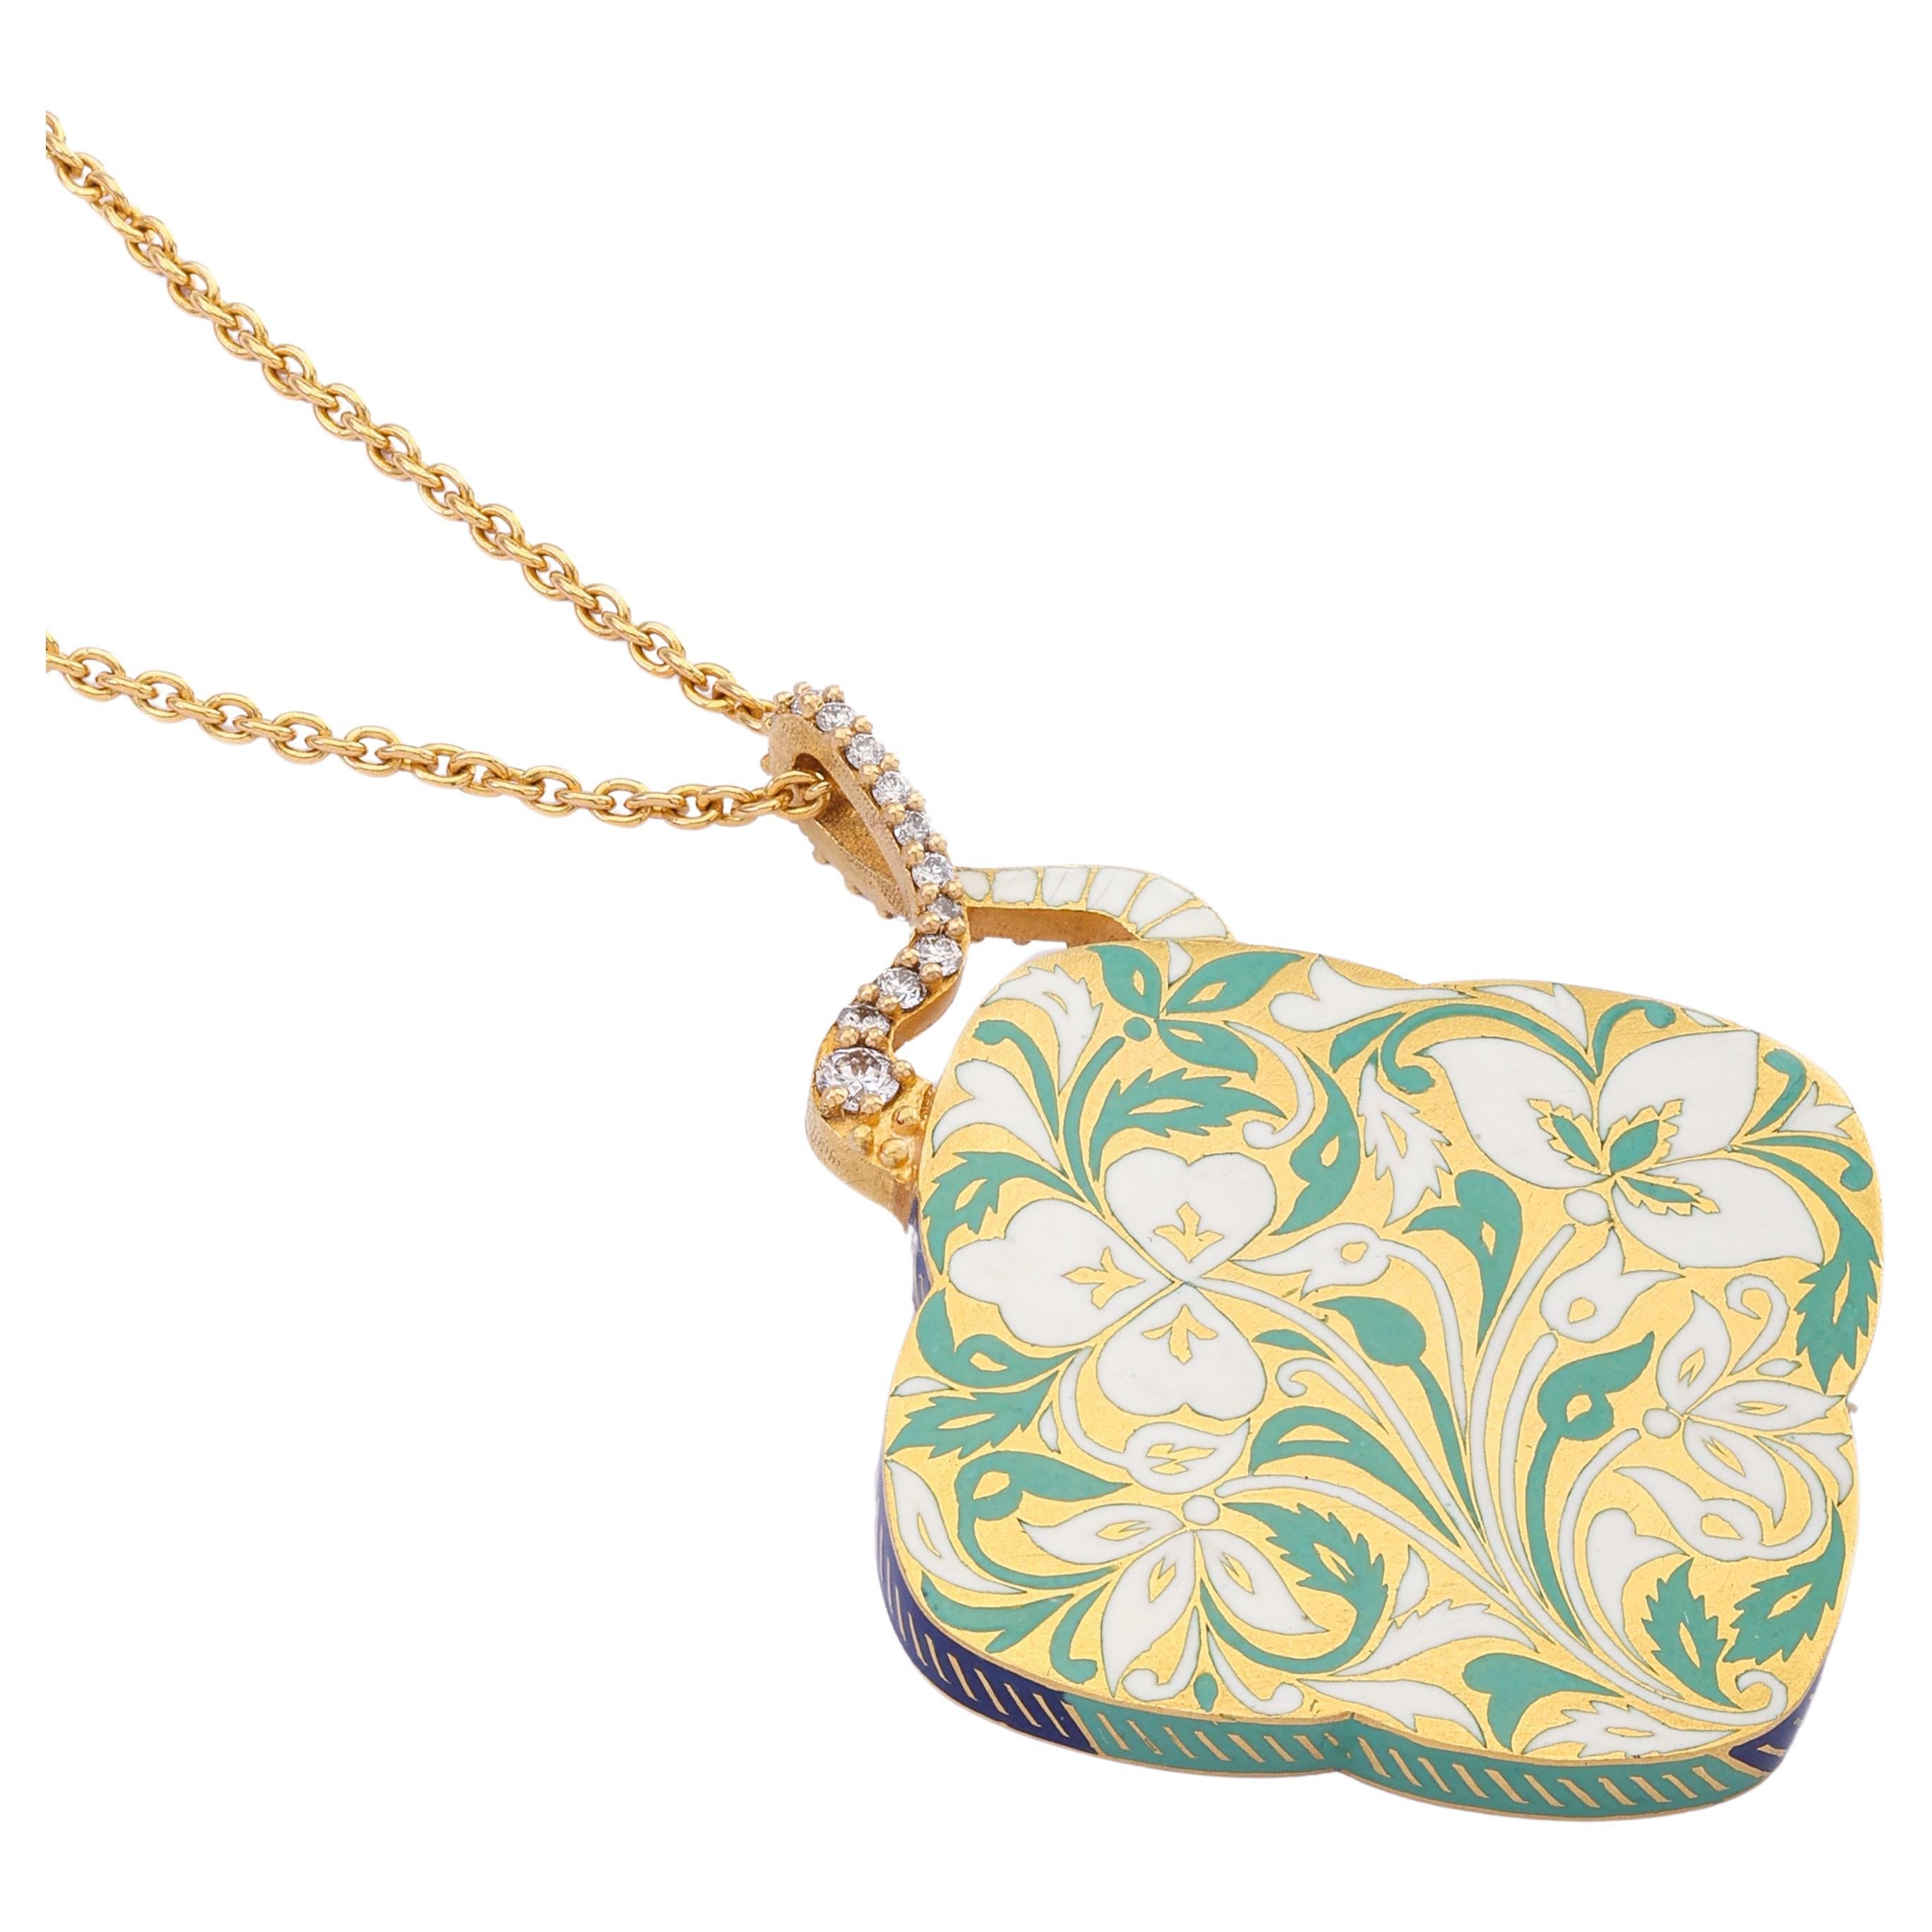 22k Gold Handmade Blue and Green Floral Enamel Pendant Necklace by Agaro Jewels For Sale